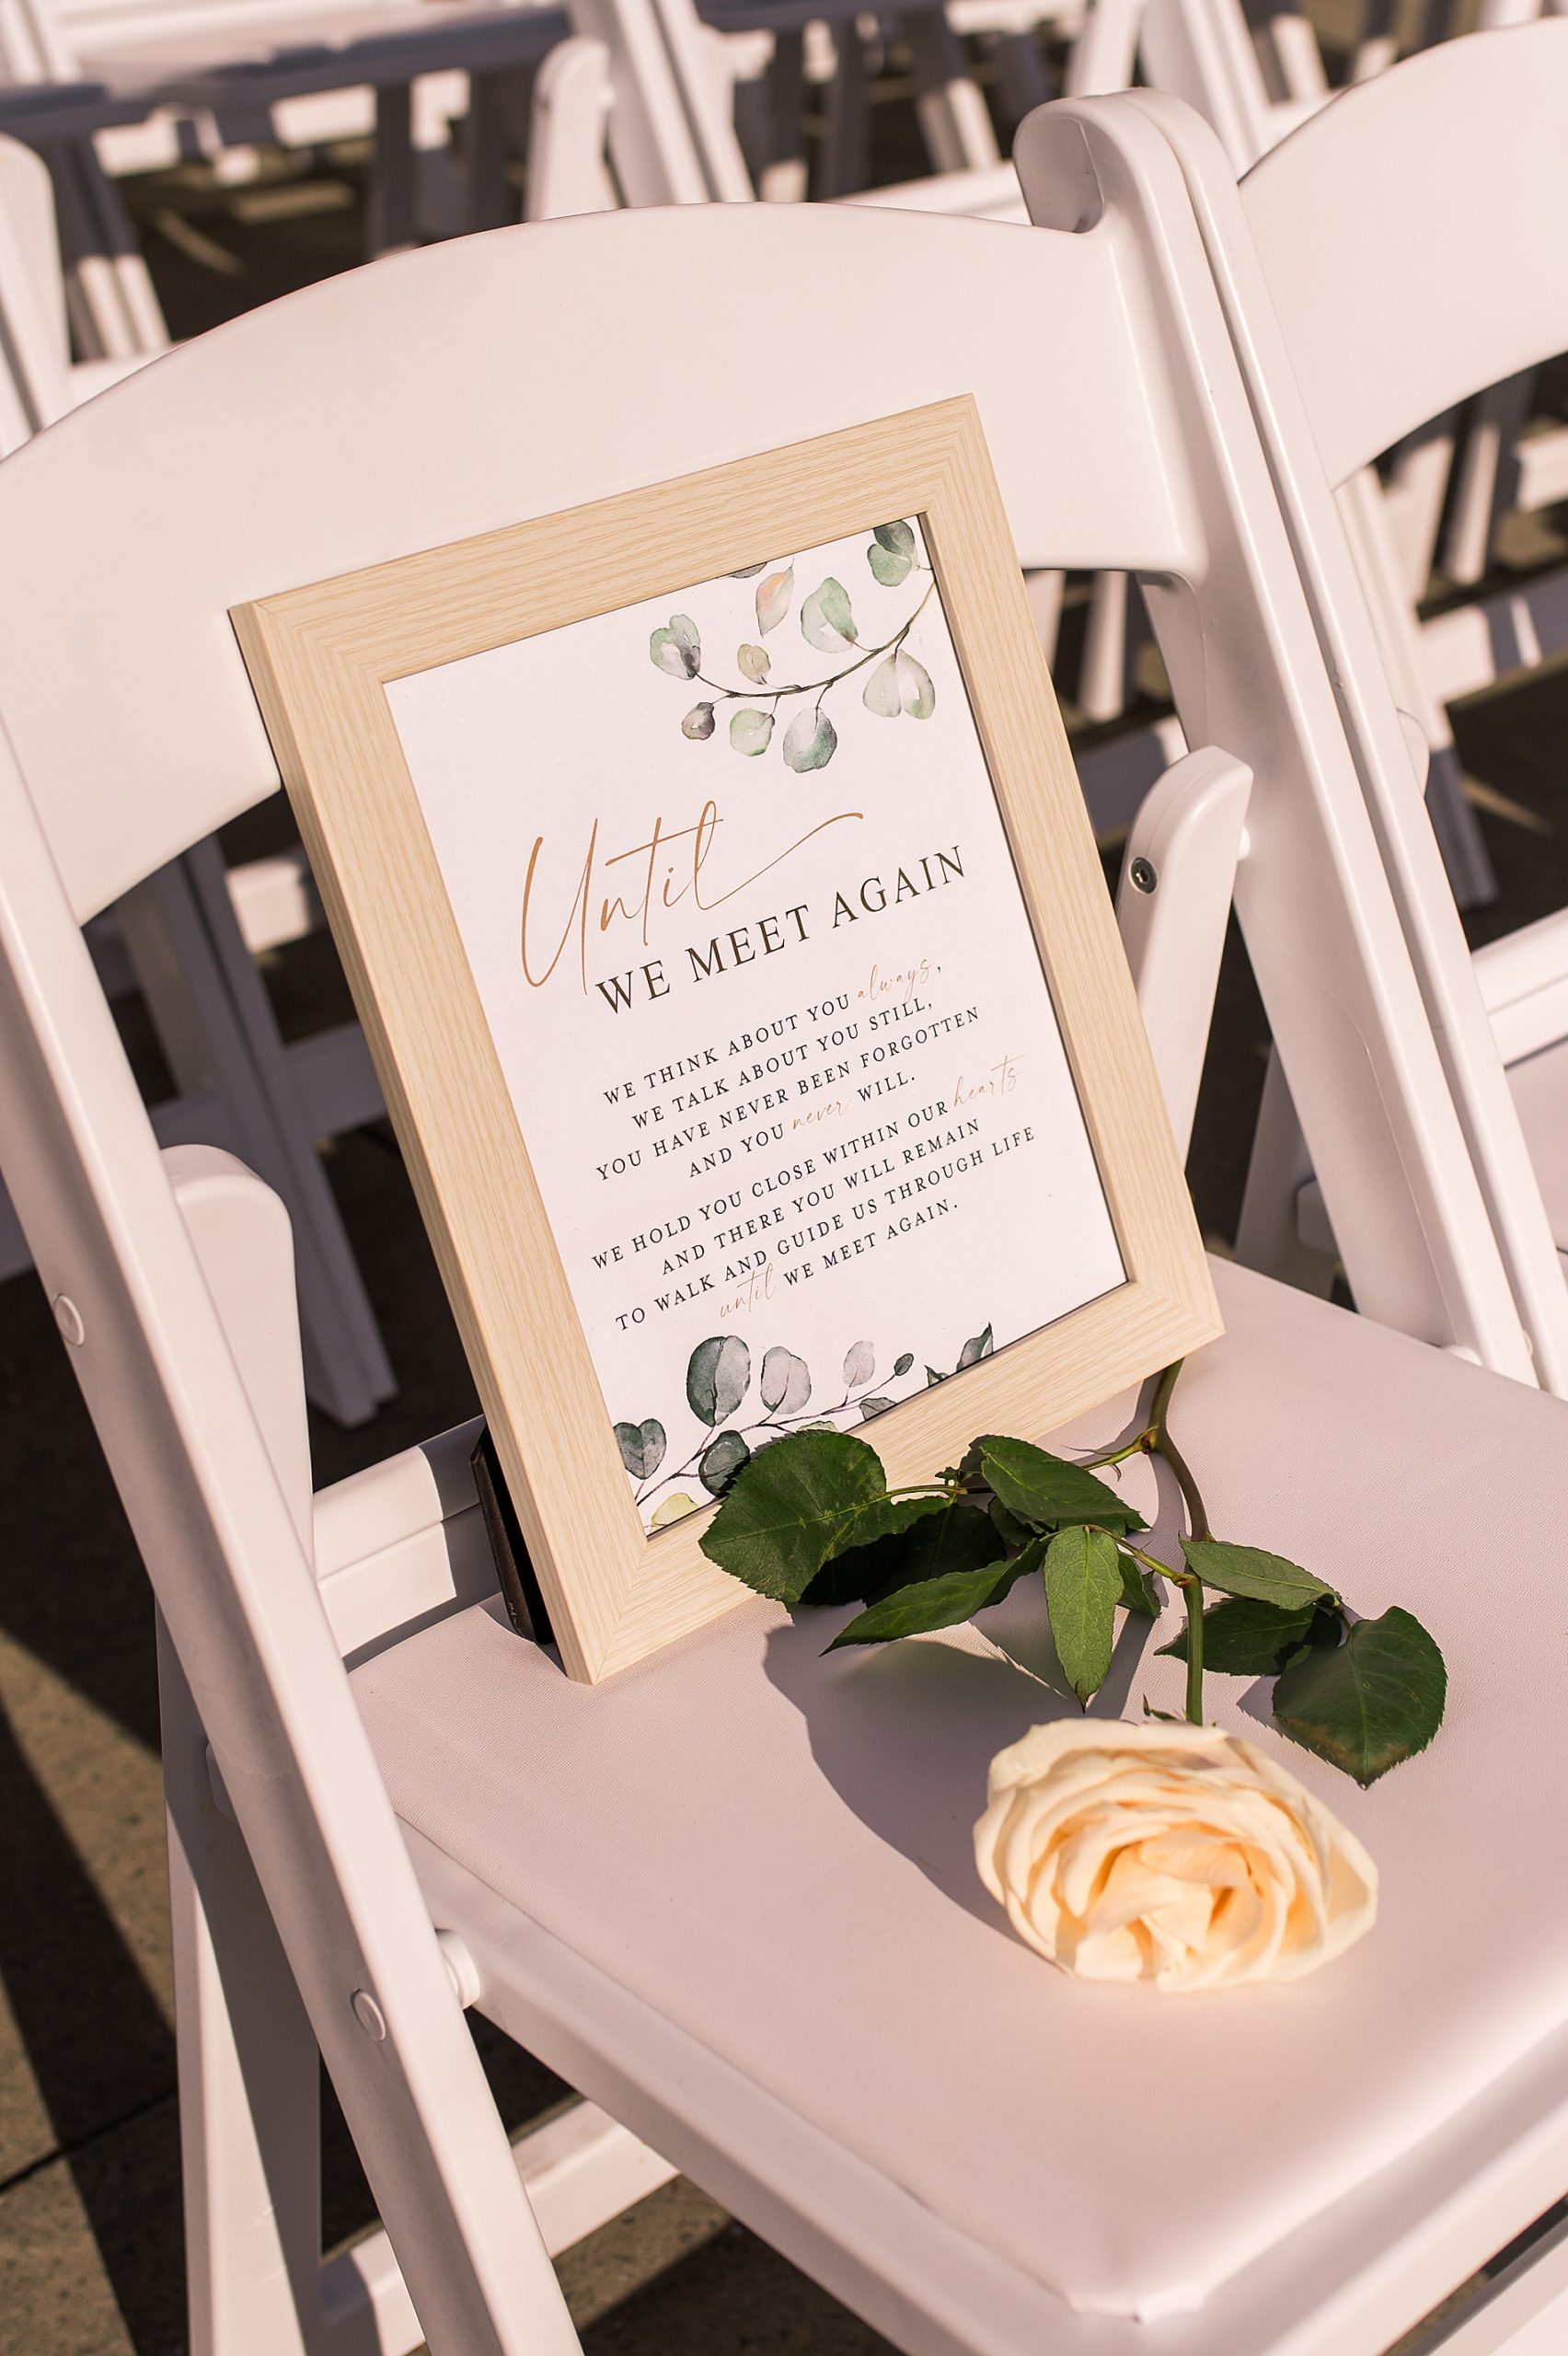 reserved seat for bride's father in heaven